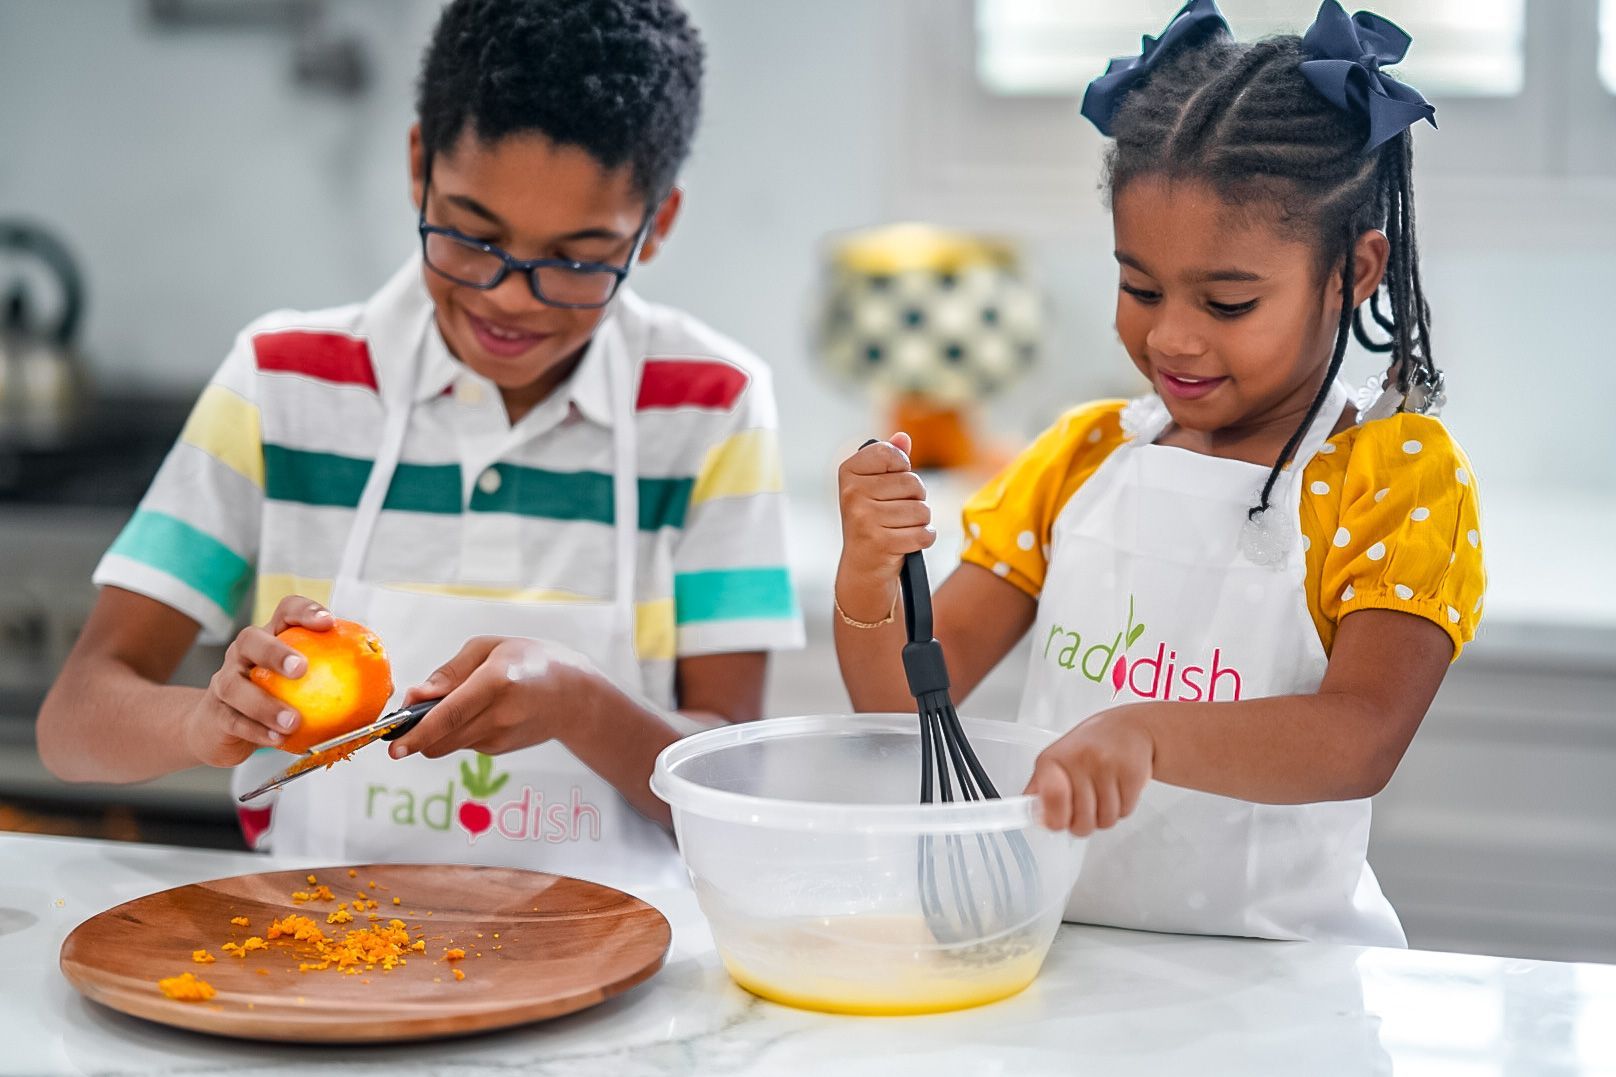 10 kids cooking and baking kits for little aspiring chefs and bakers